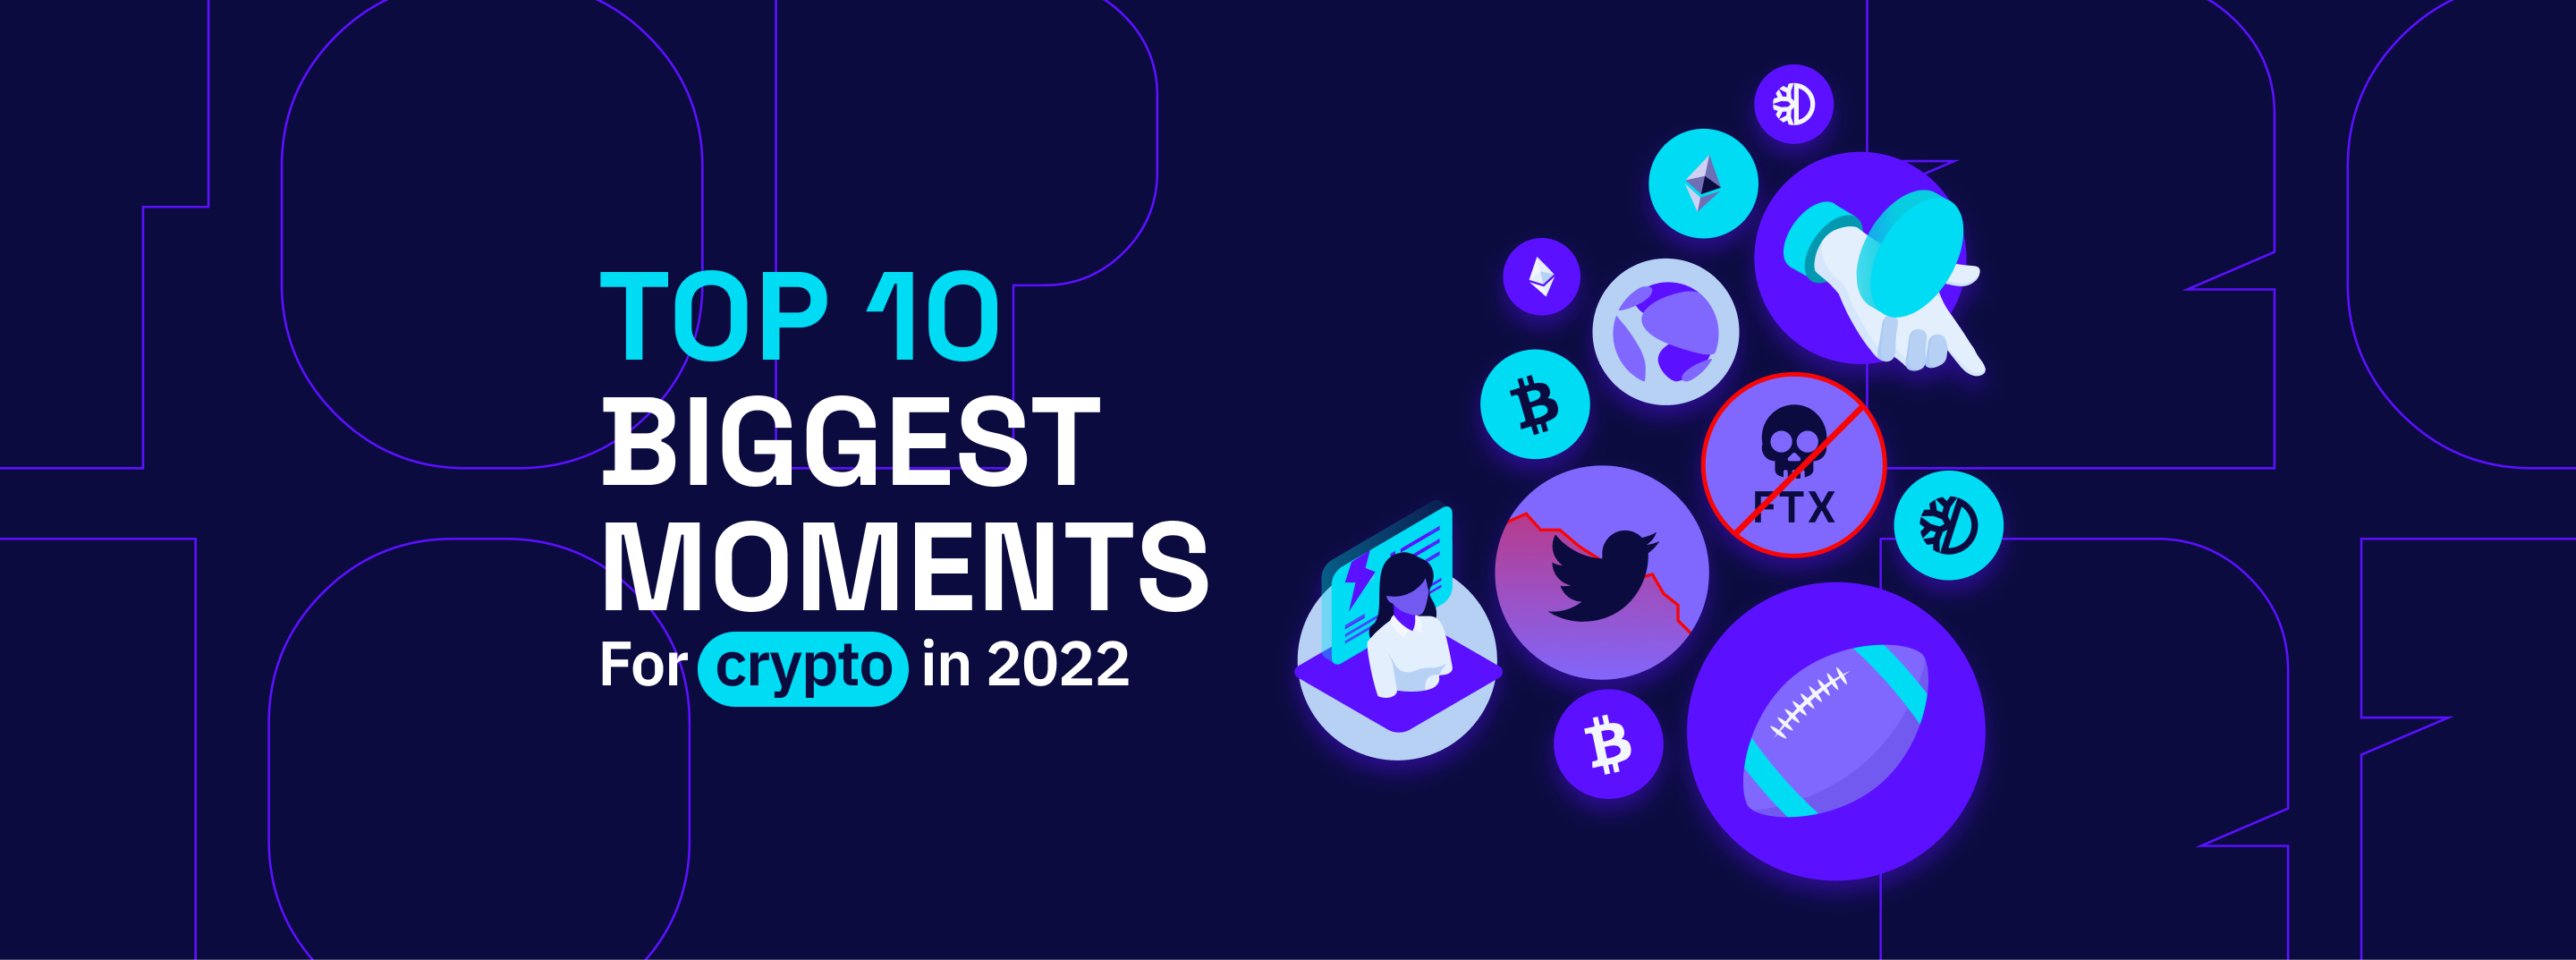 The 10 Biggest Moments For Crypto in 2022